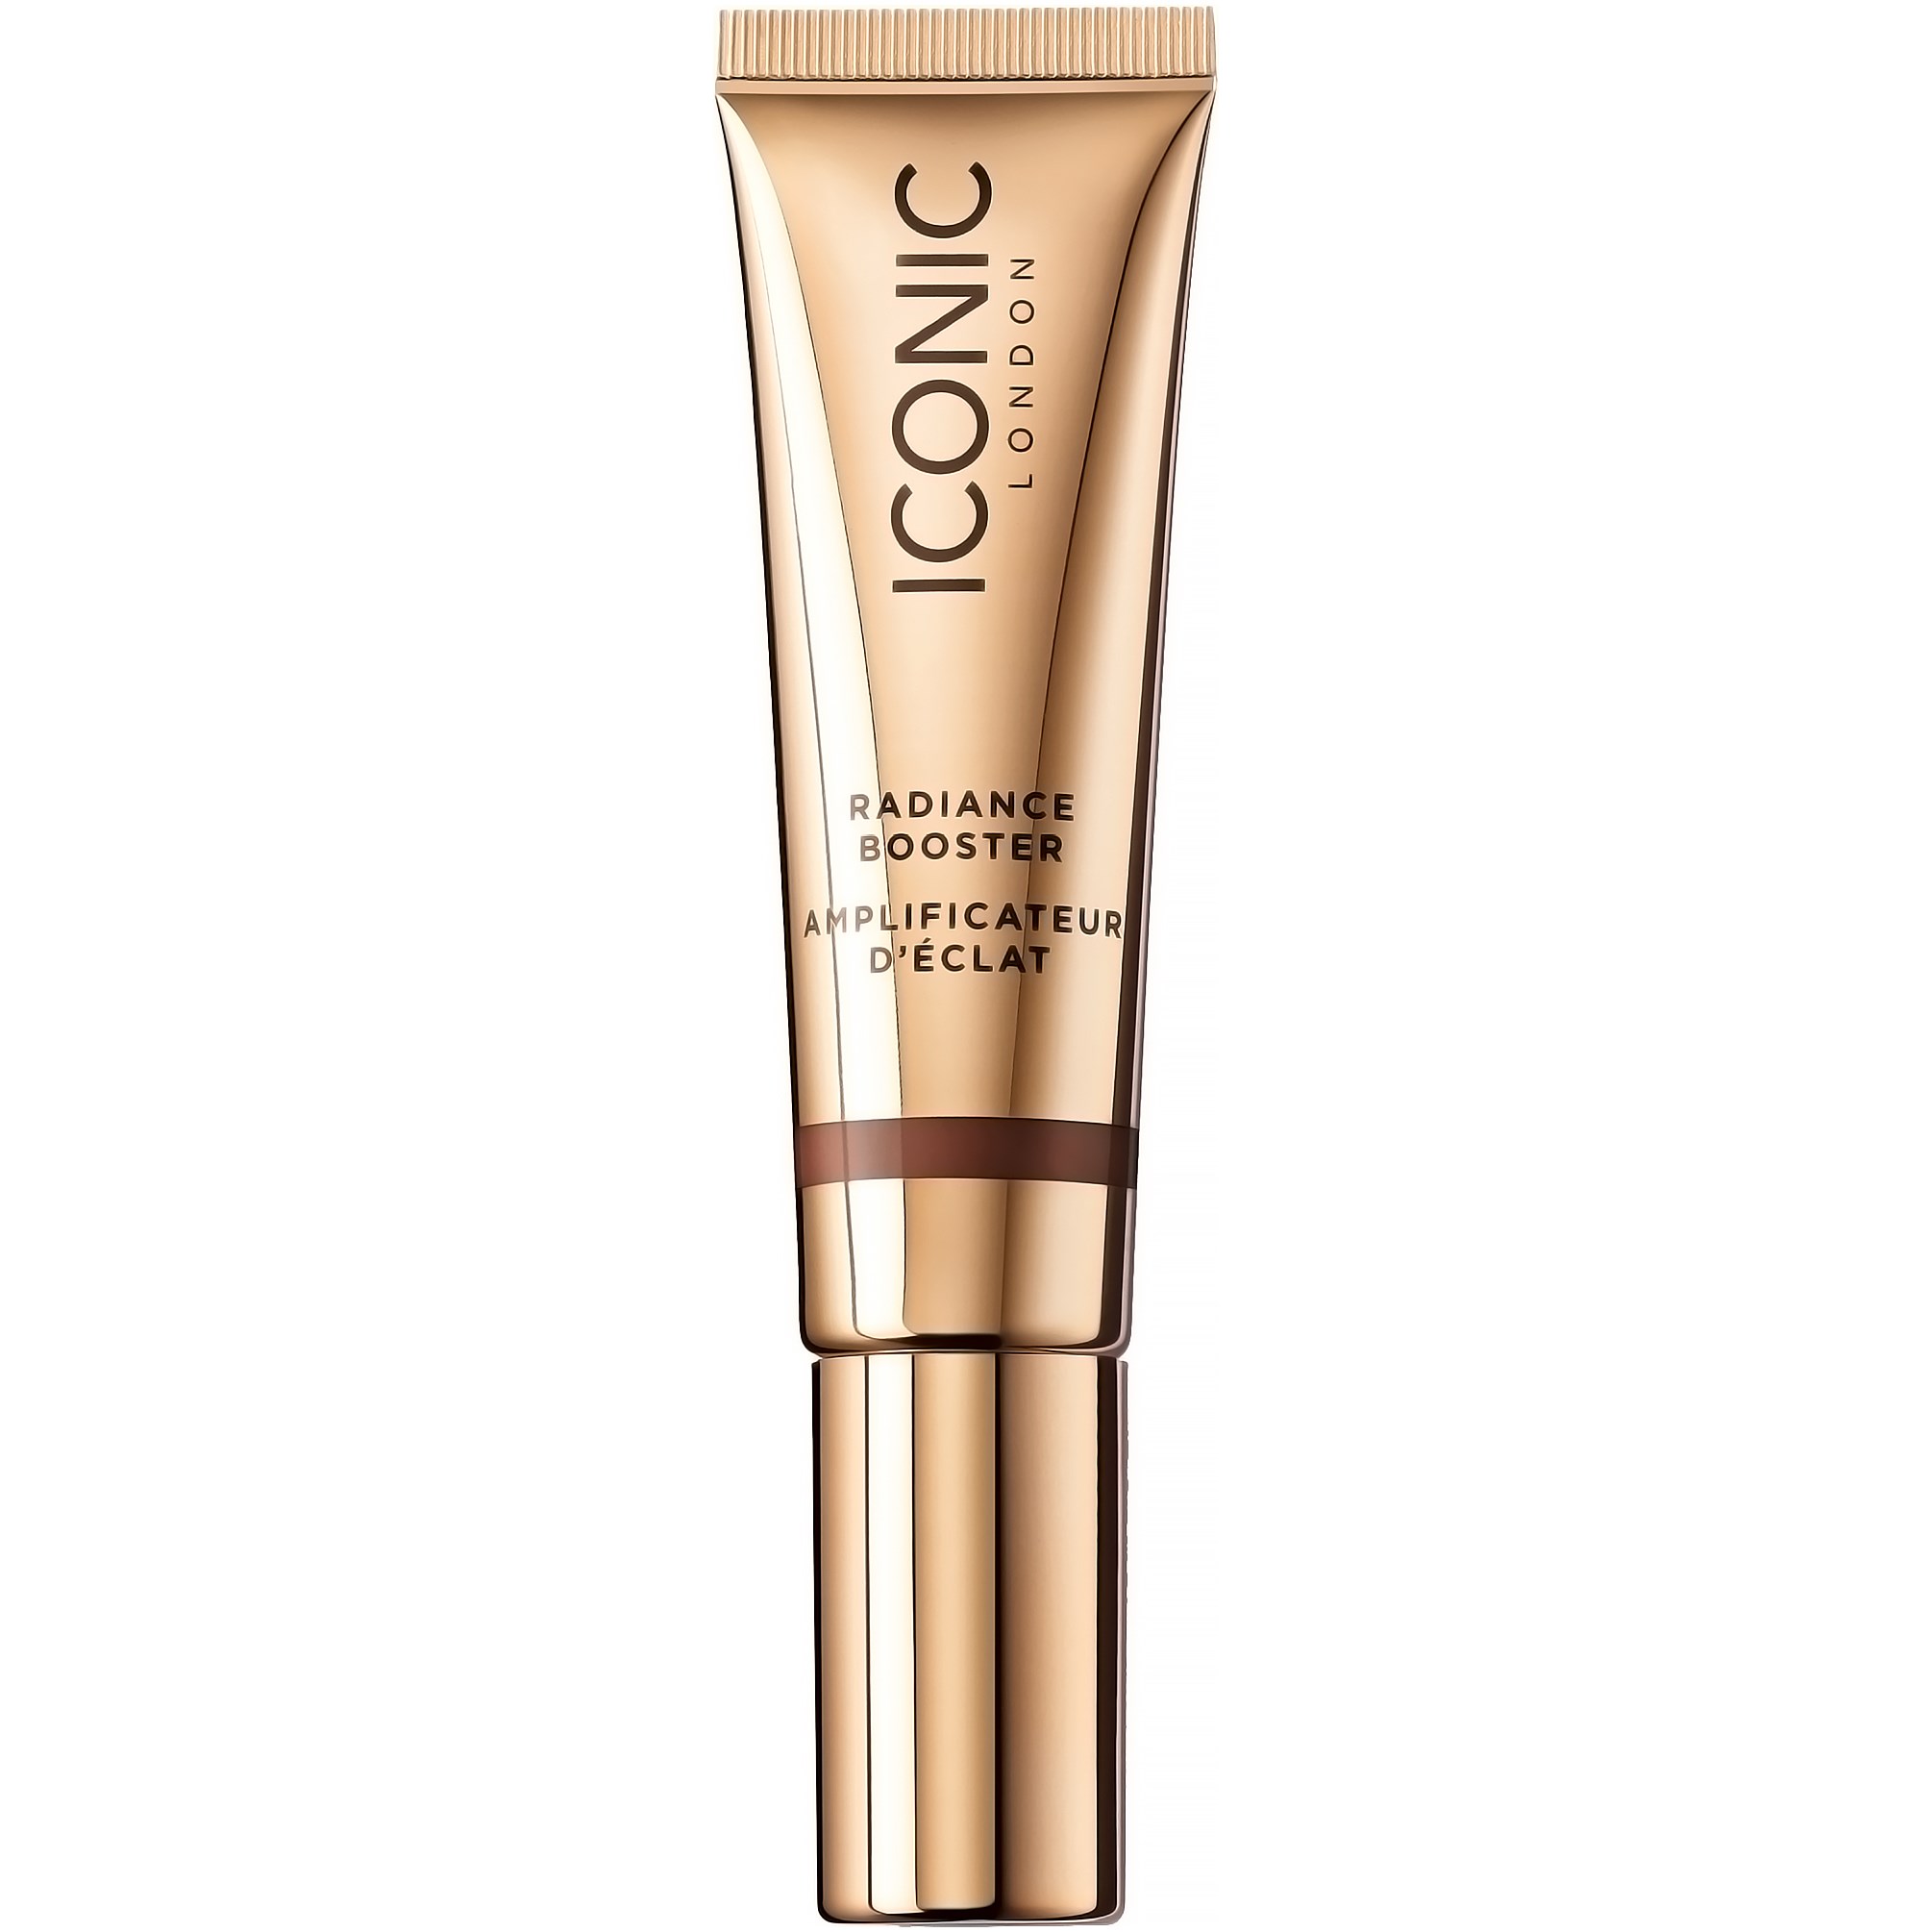 ICONIC London Radiance Booster Rich Glow